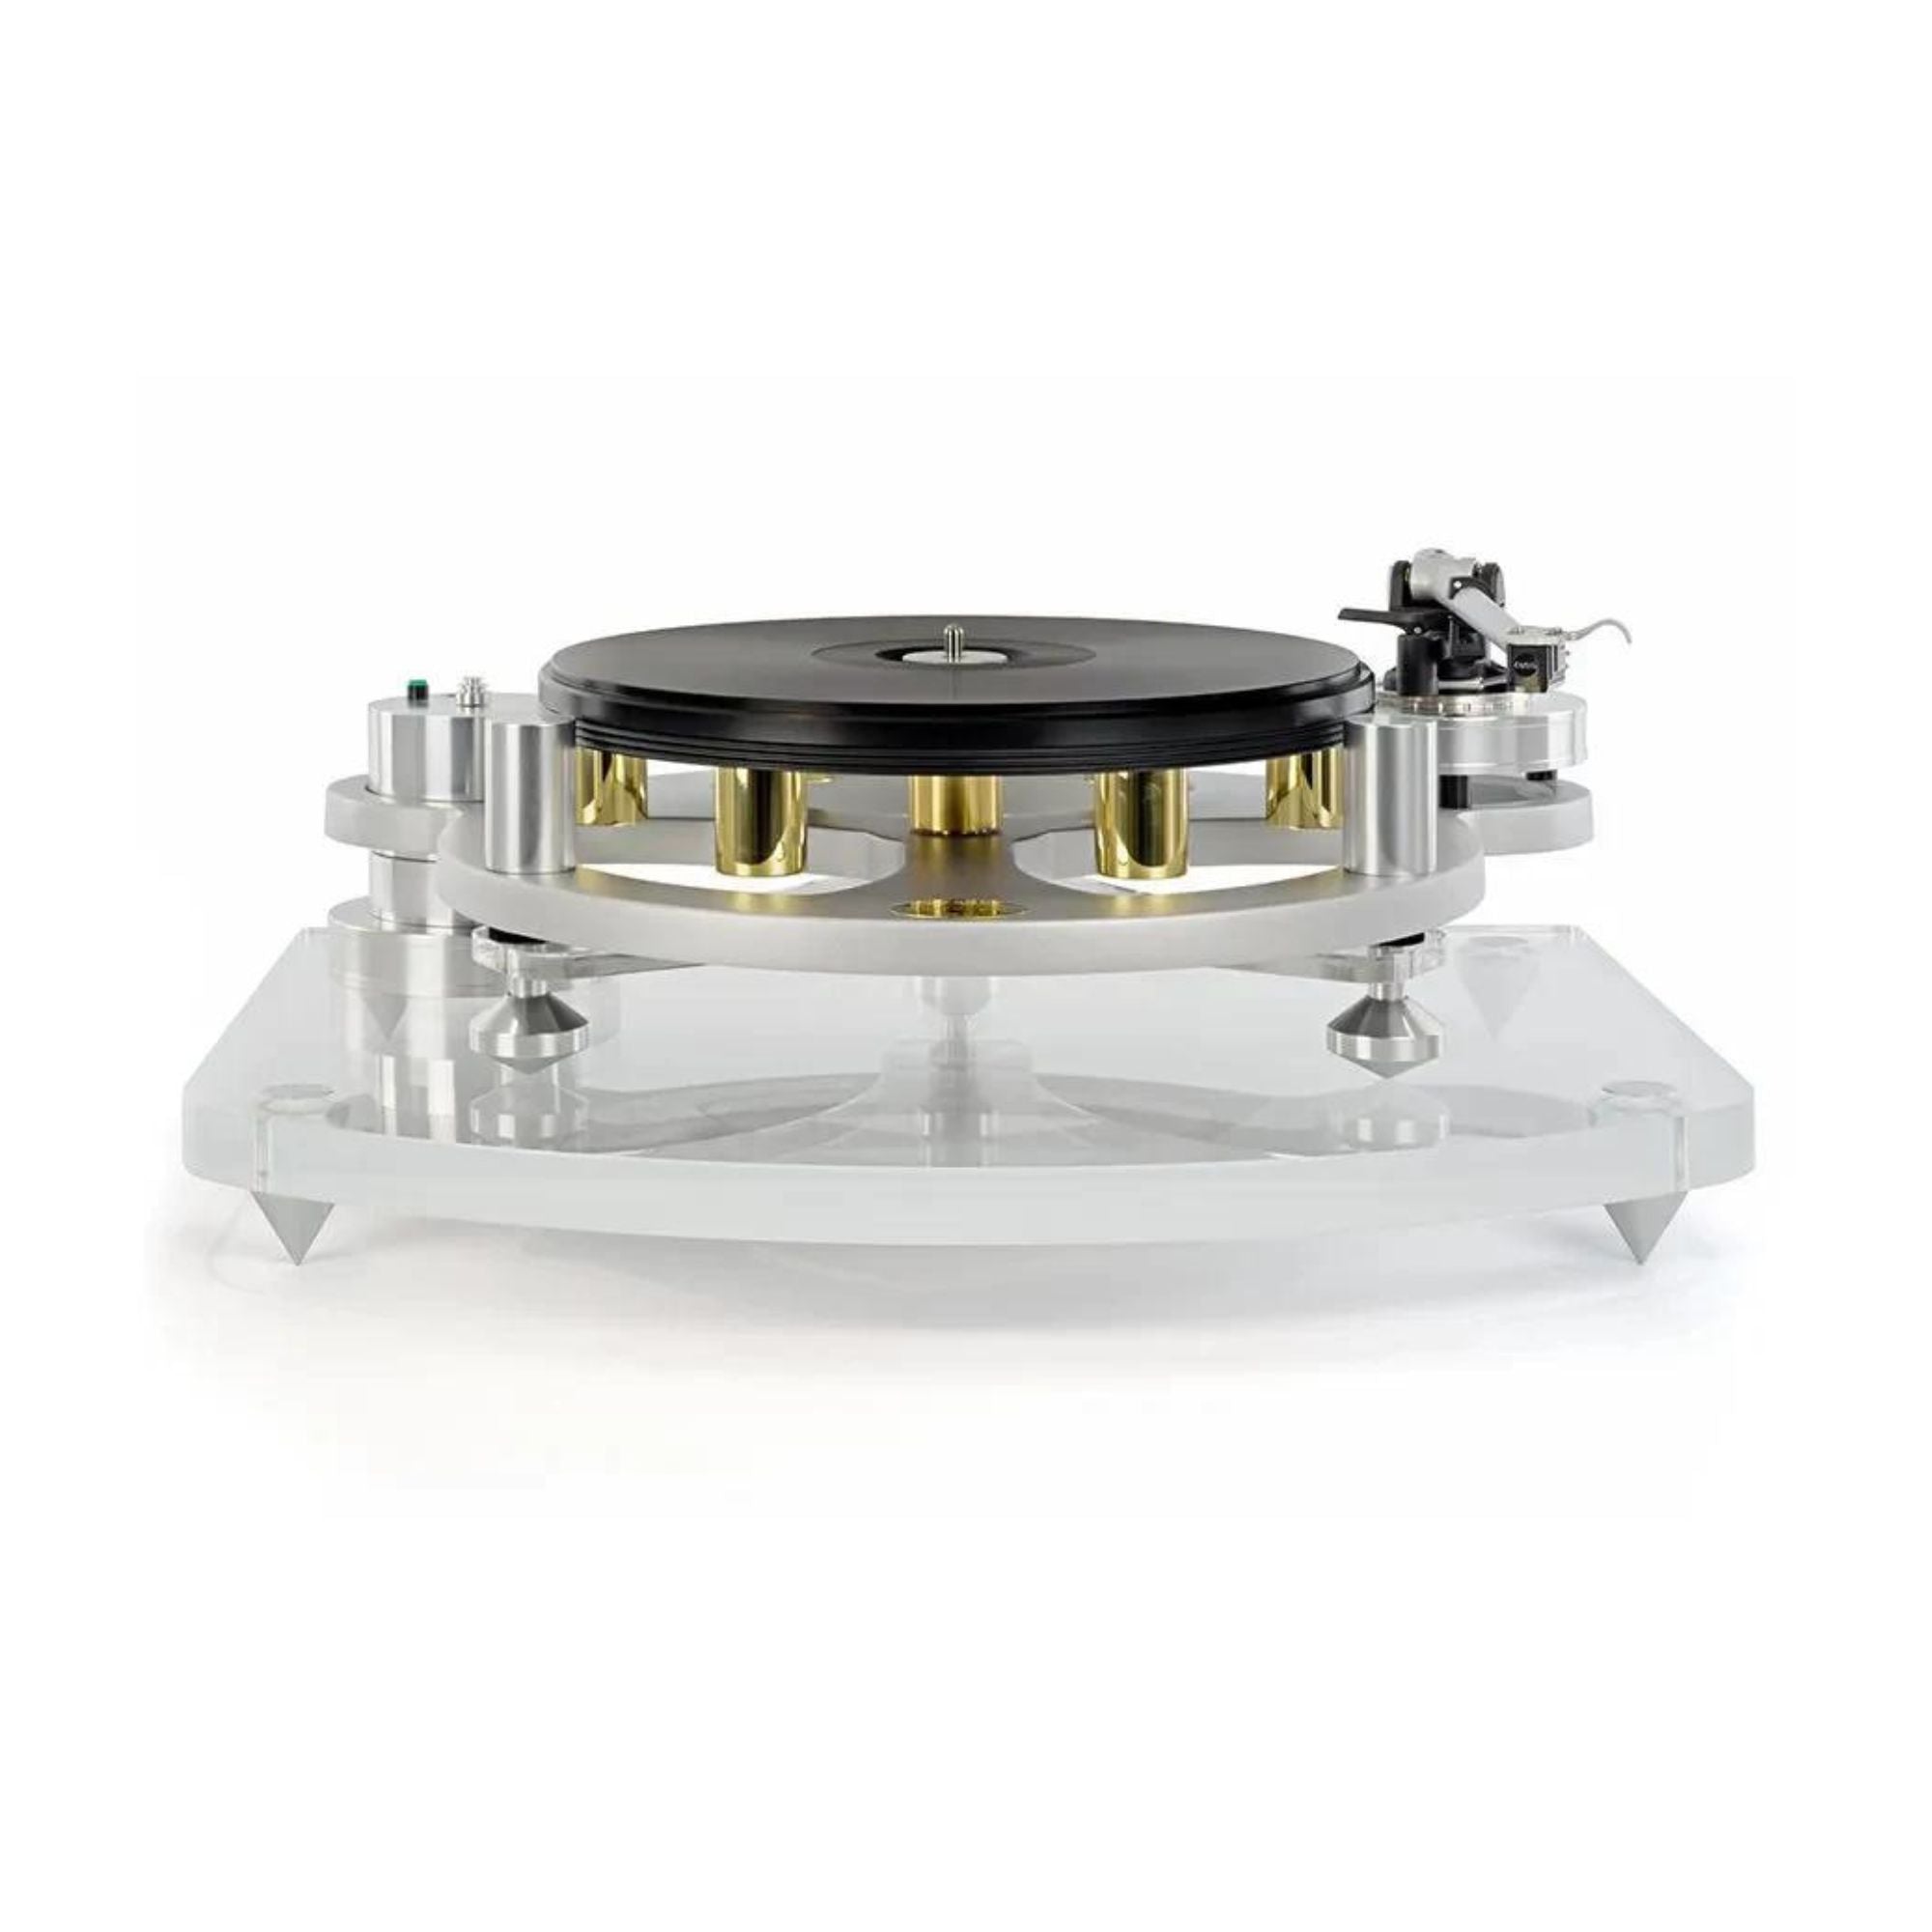 Michell Black Gyro SE Turntable With T3 Tonearm(T006), Michell, Turntable - AVStore.in